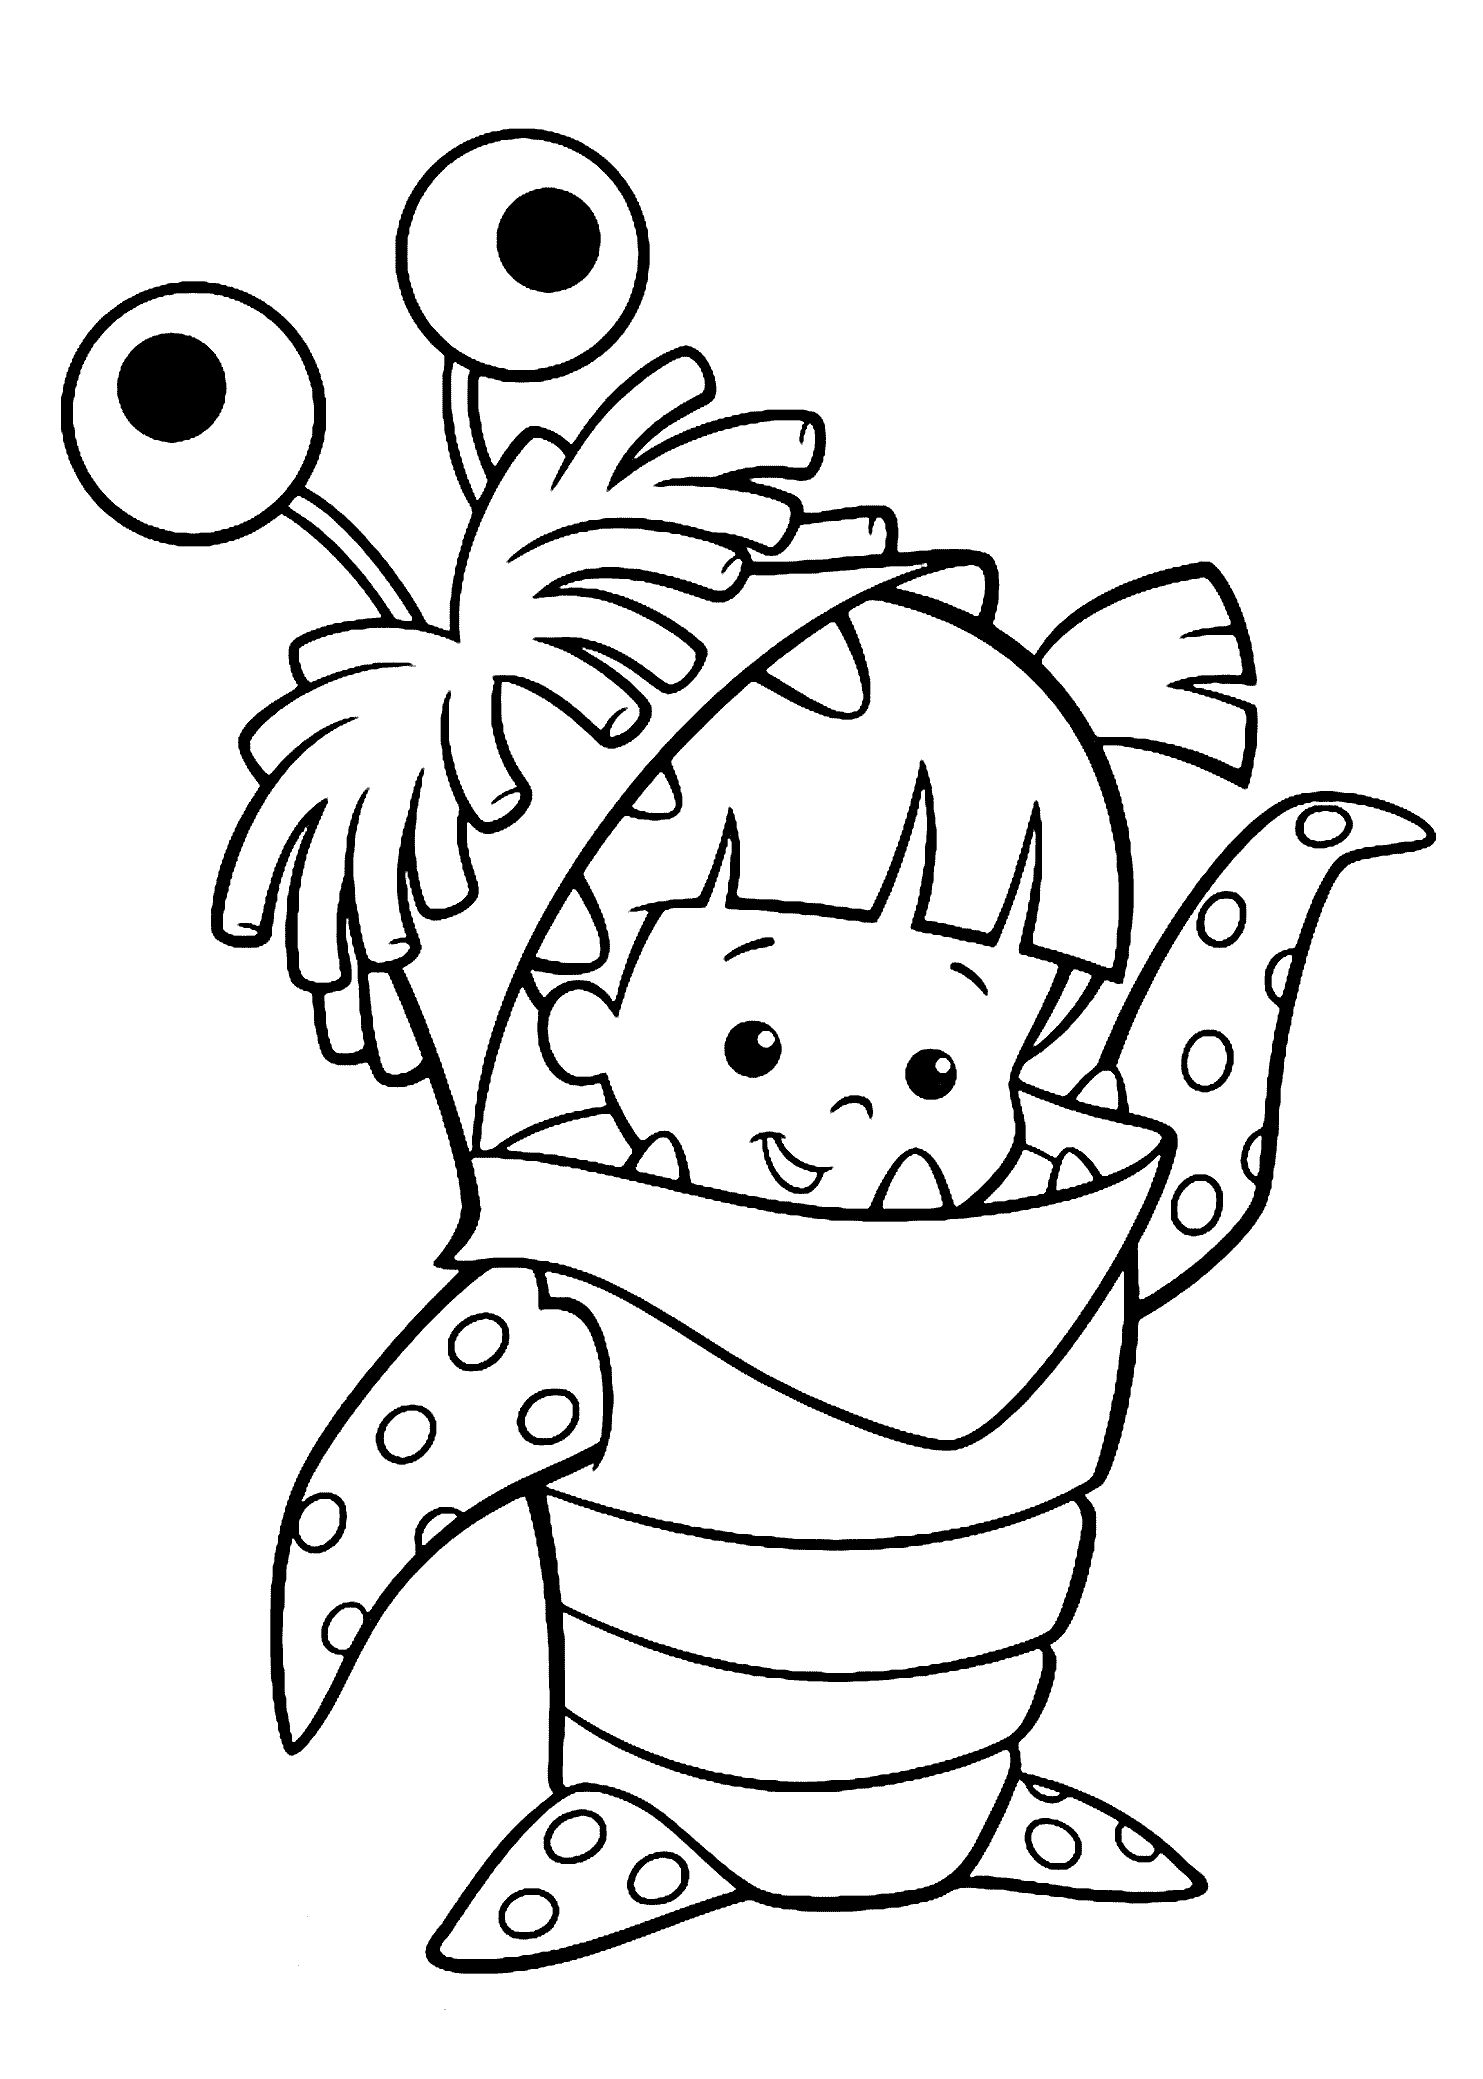 Monster Coloring Pages for boys Cute Monsters Costume Printable 2020 0635 Coloring4free